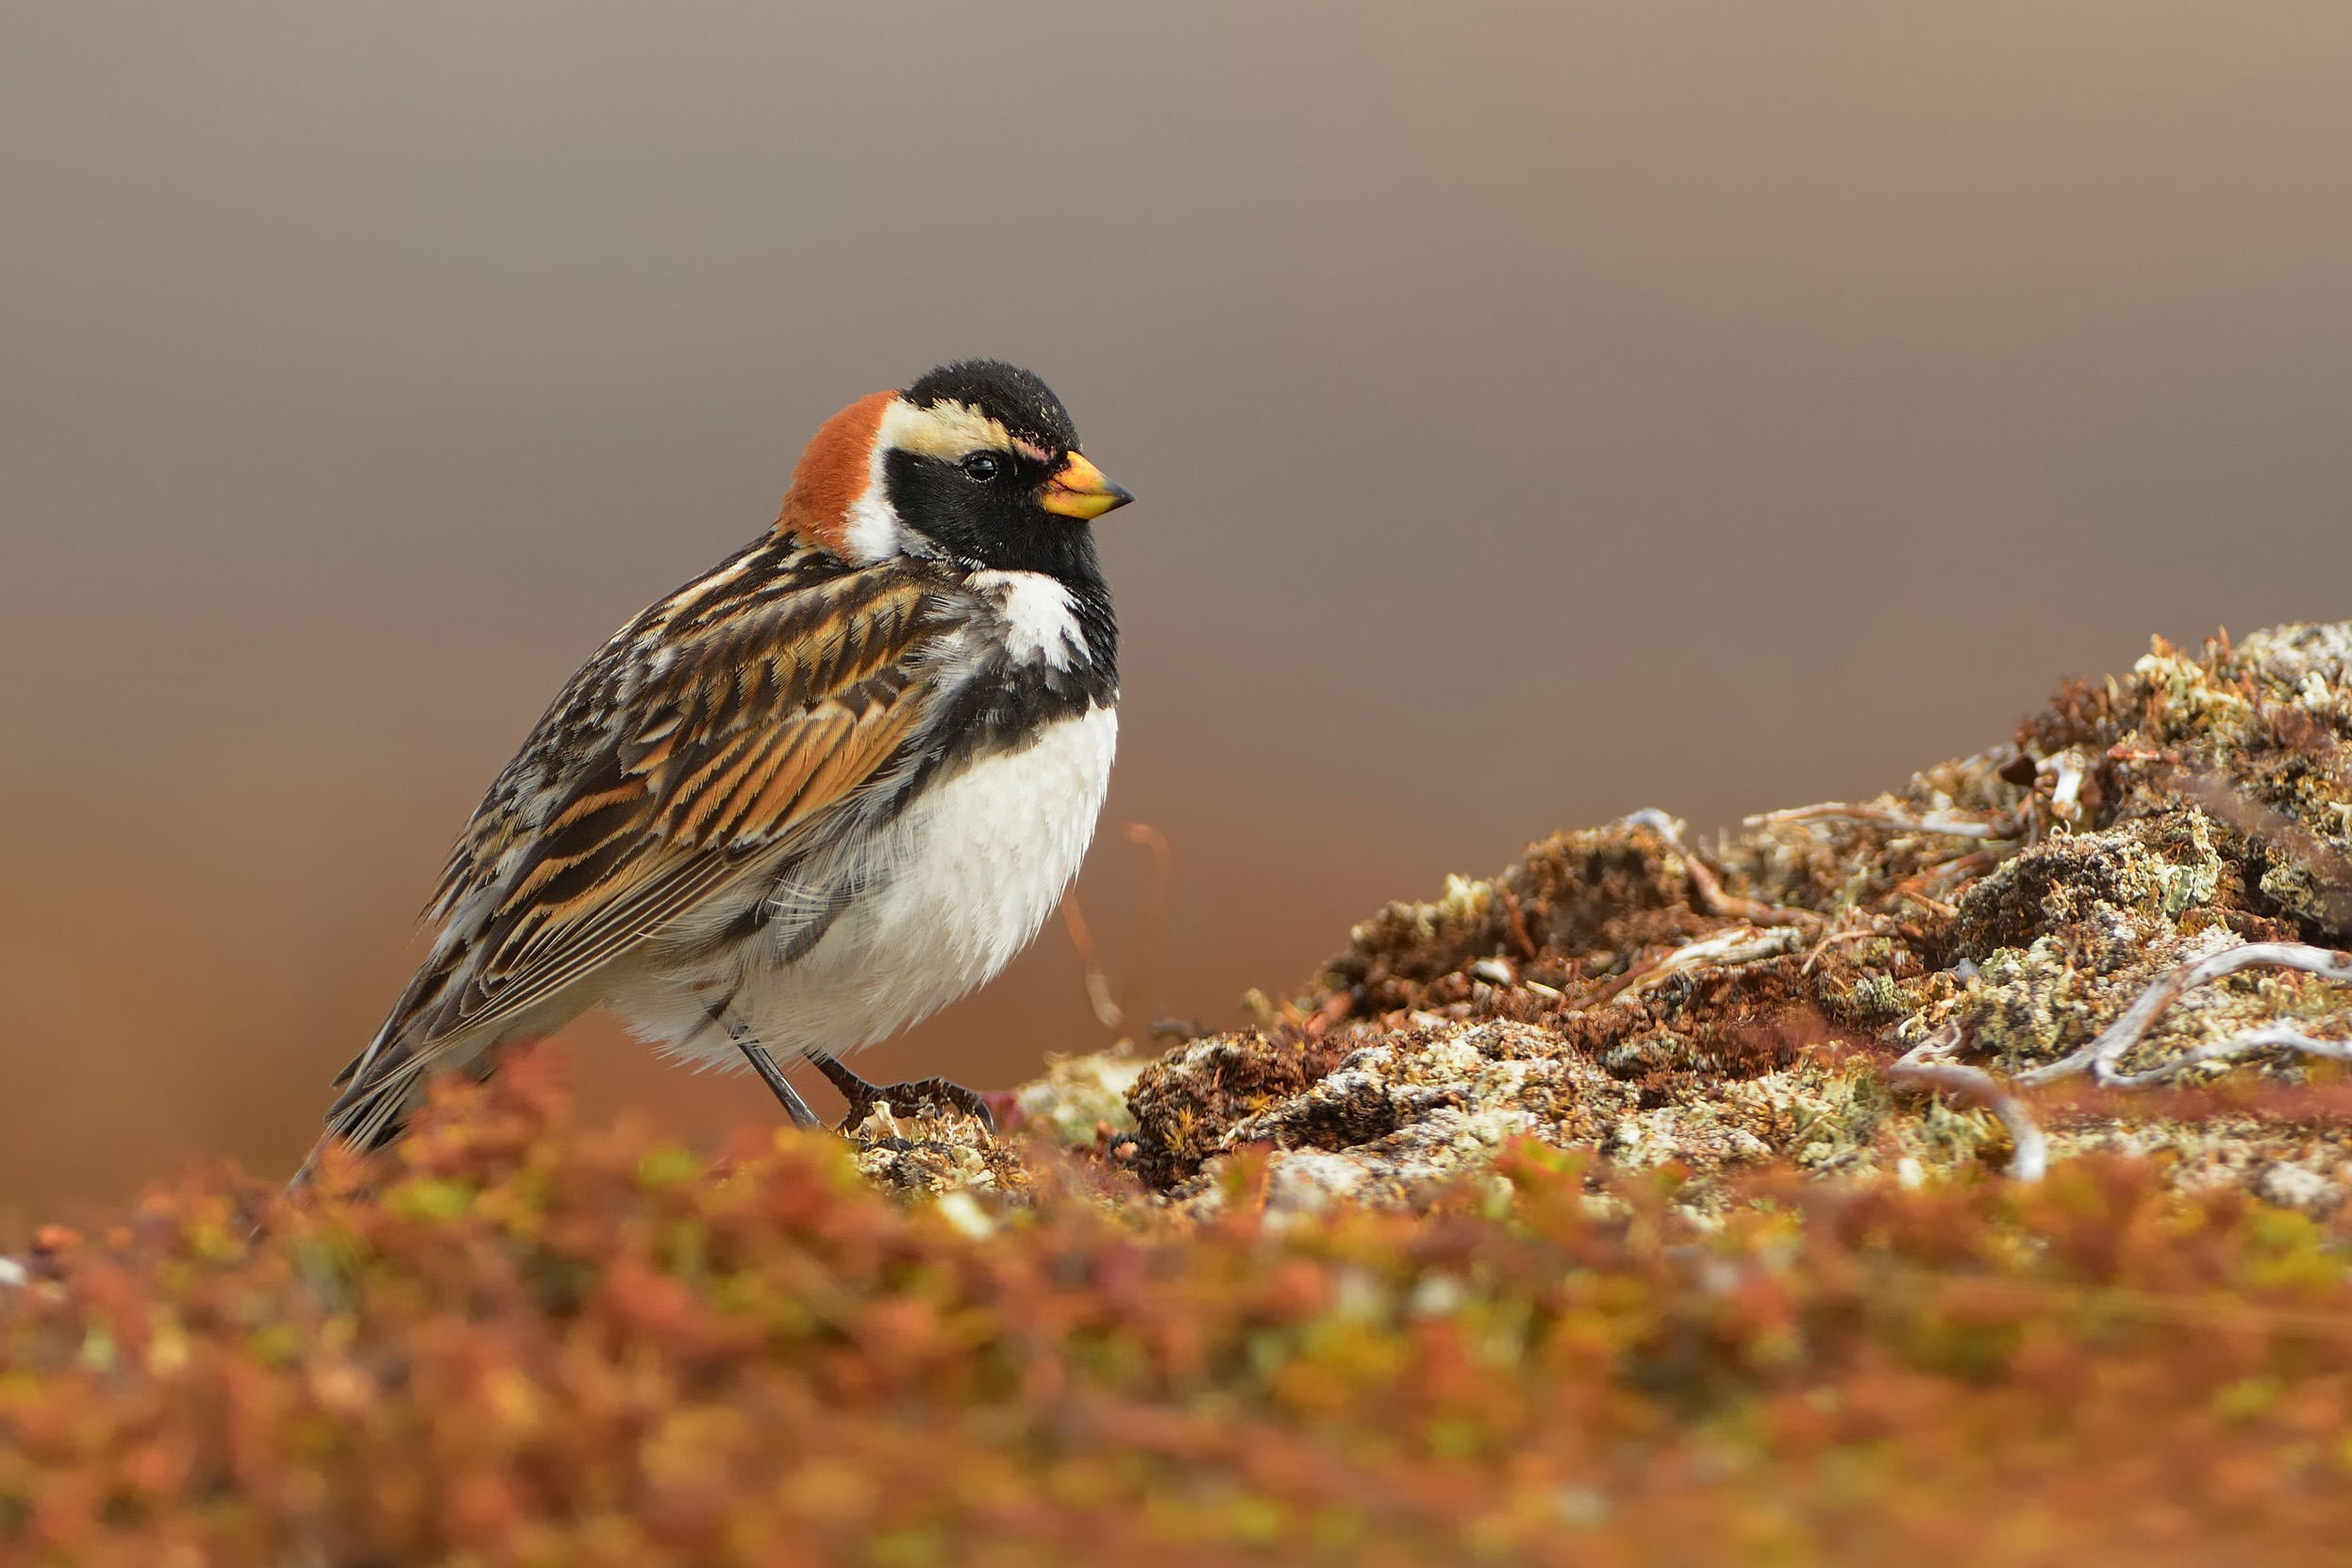 Lapland Bunting perched on a rock covered in orange lichen.